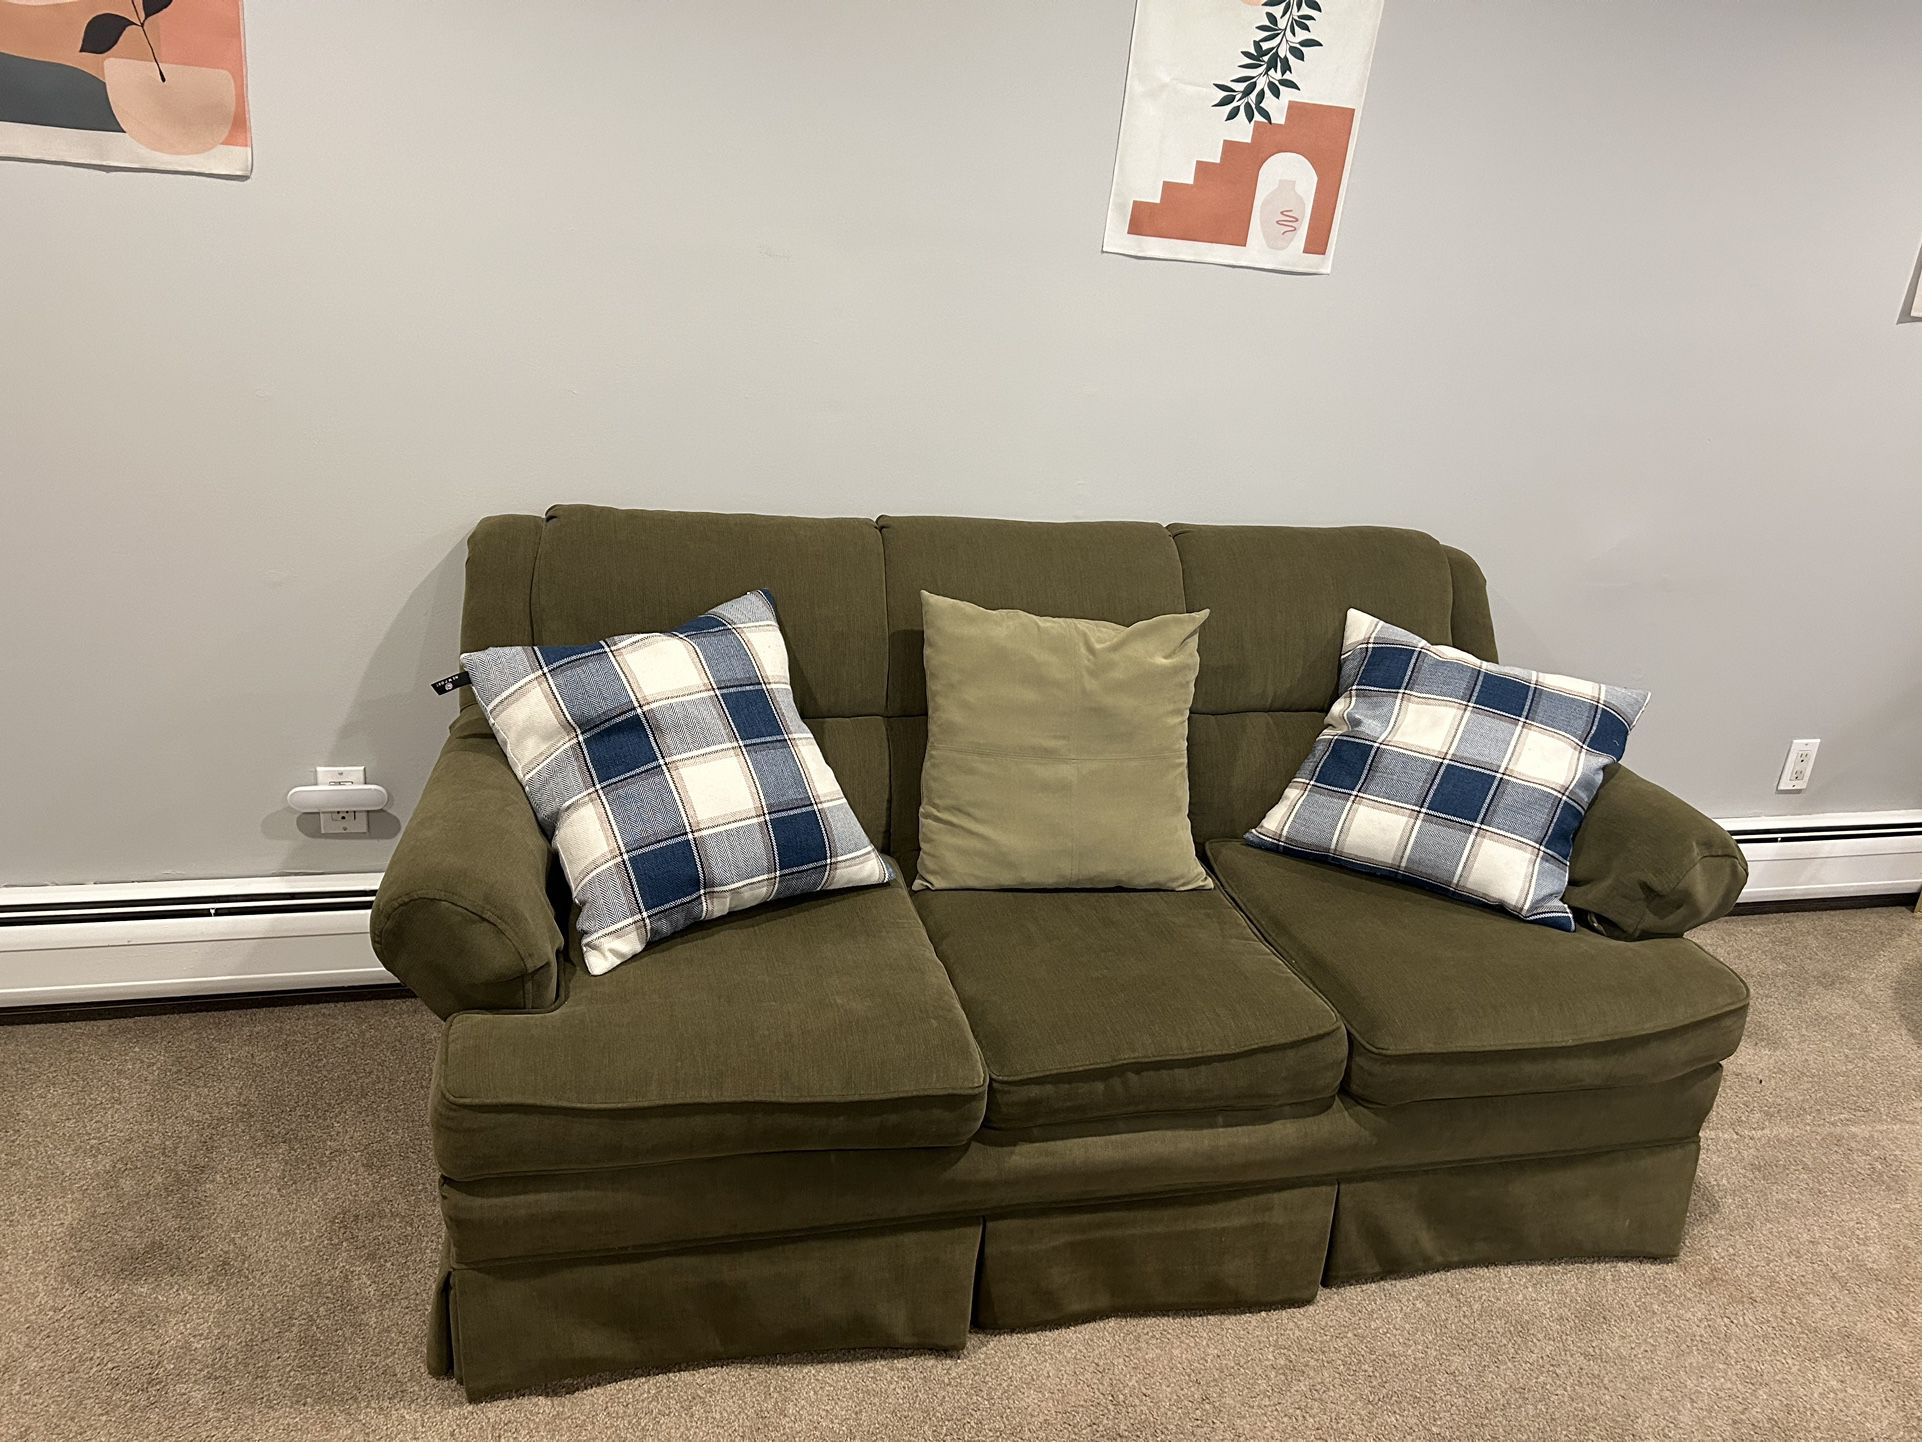 Smaller Living Room Couch.